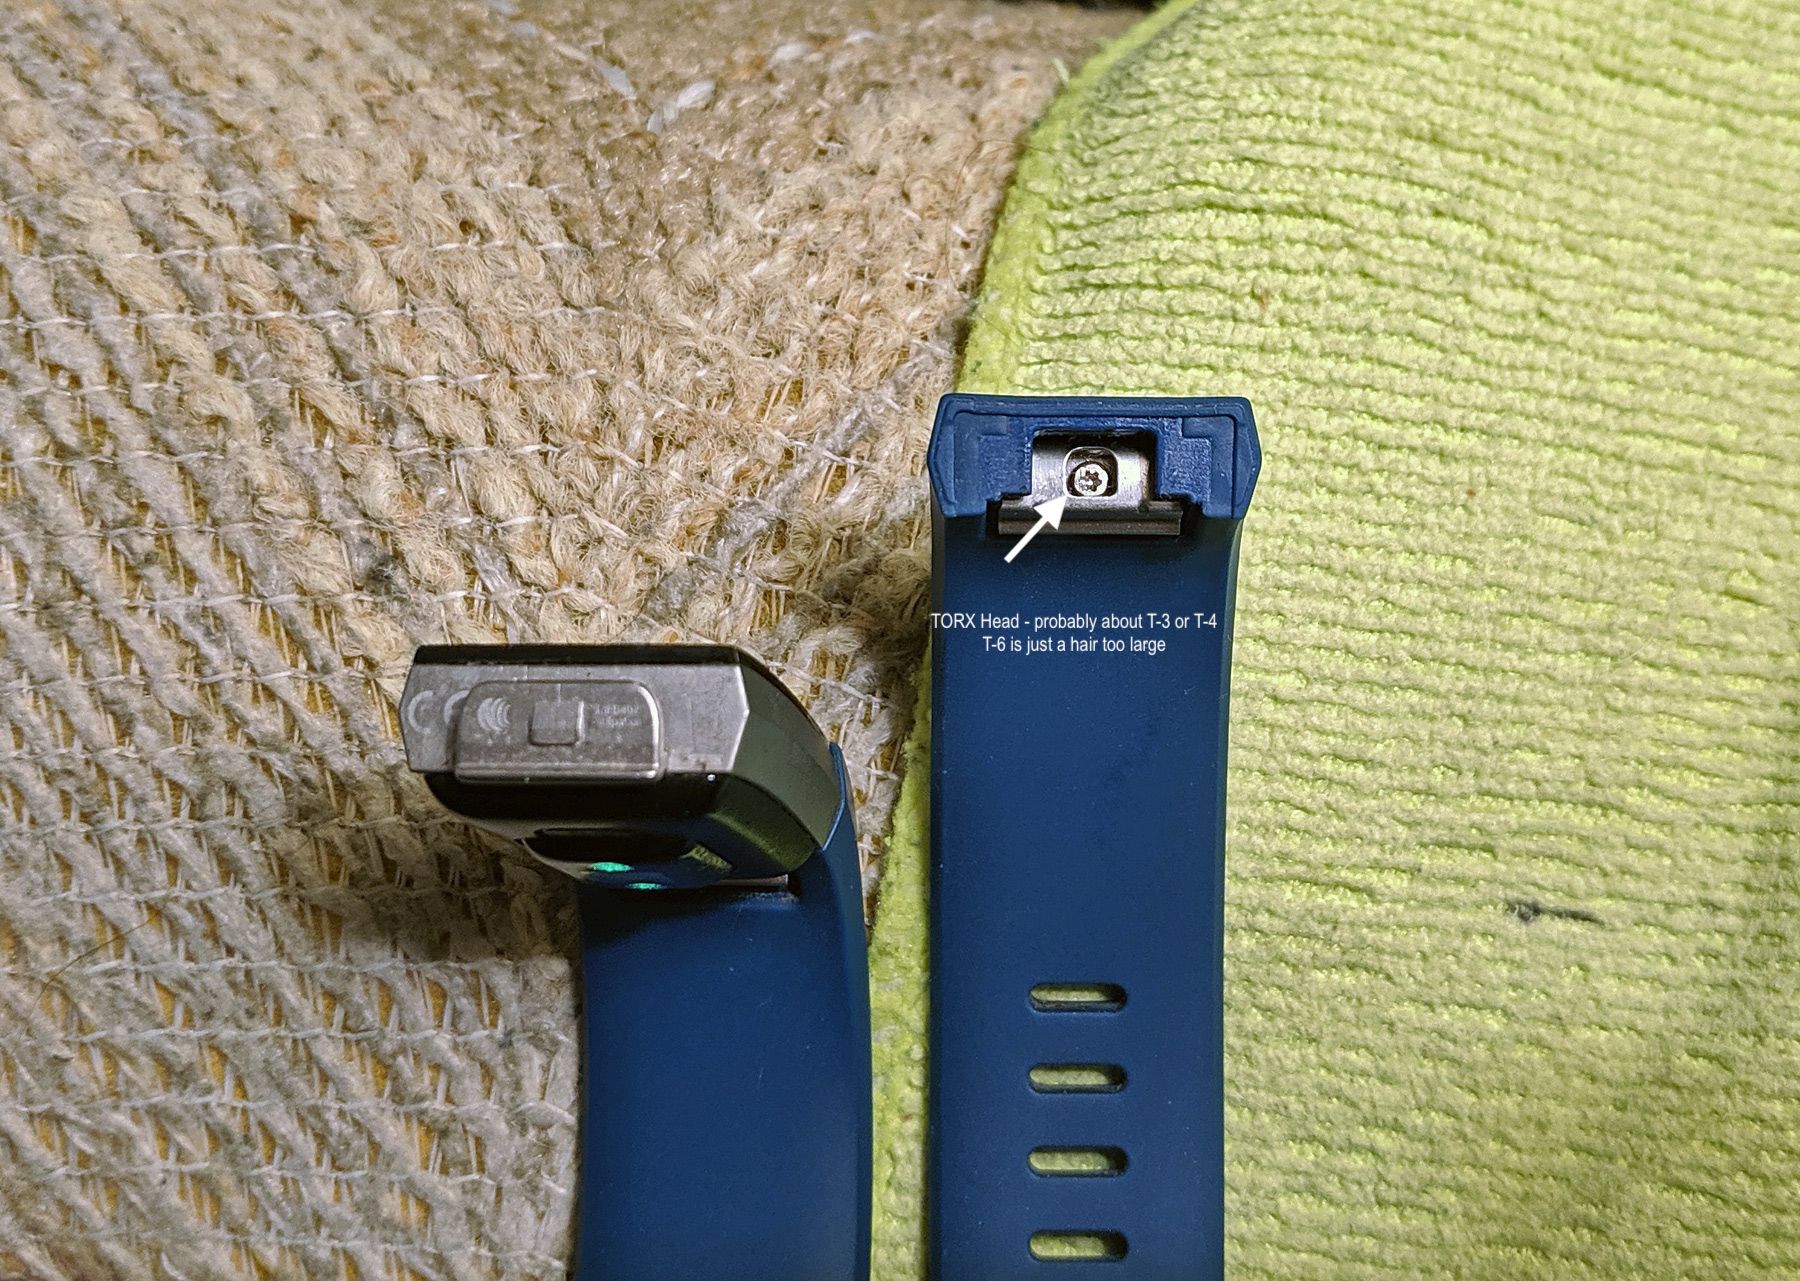 fitbit charge 2 band keeps breaking